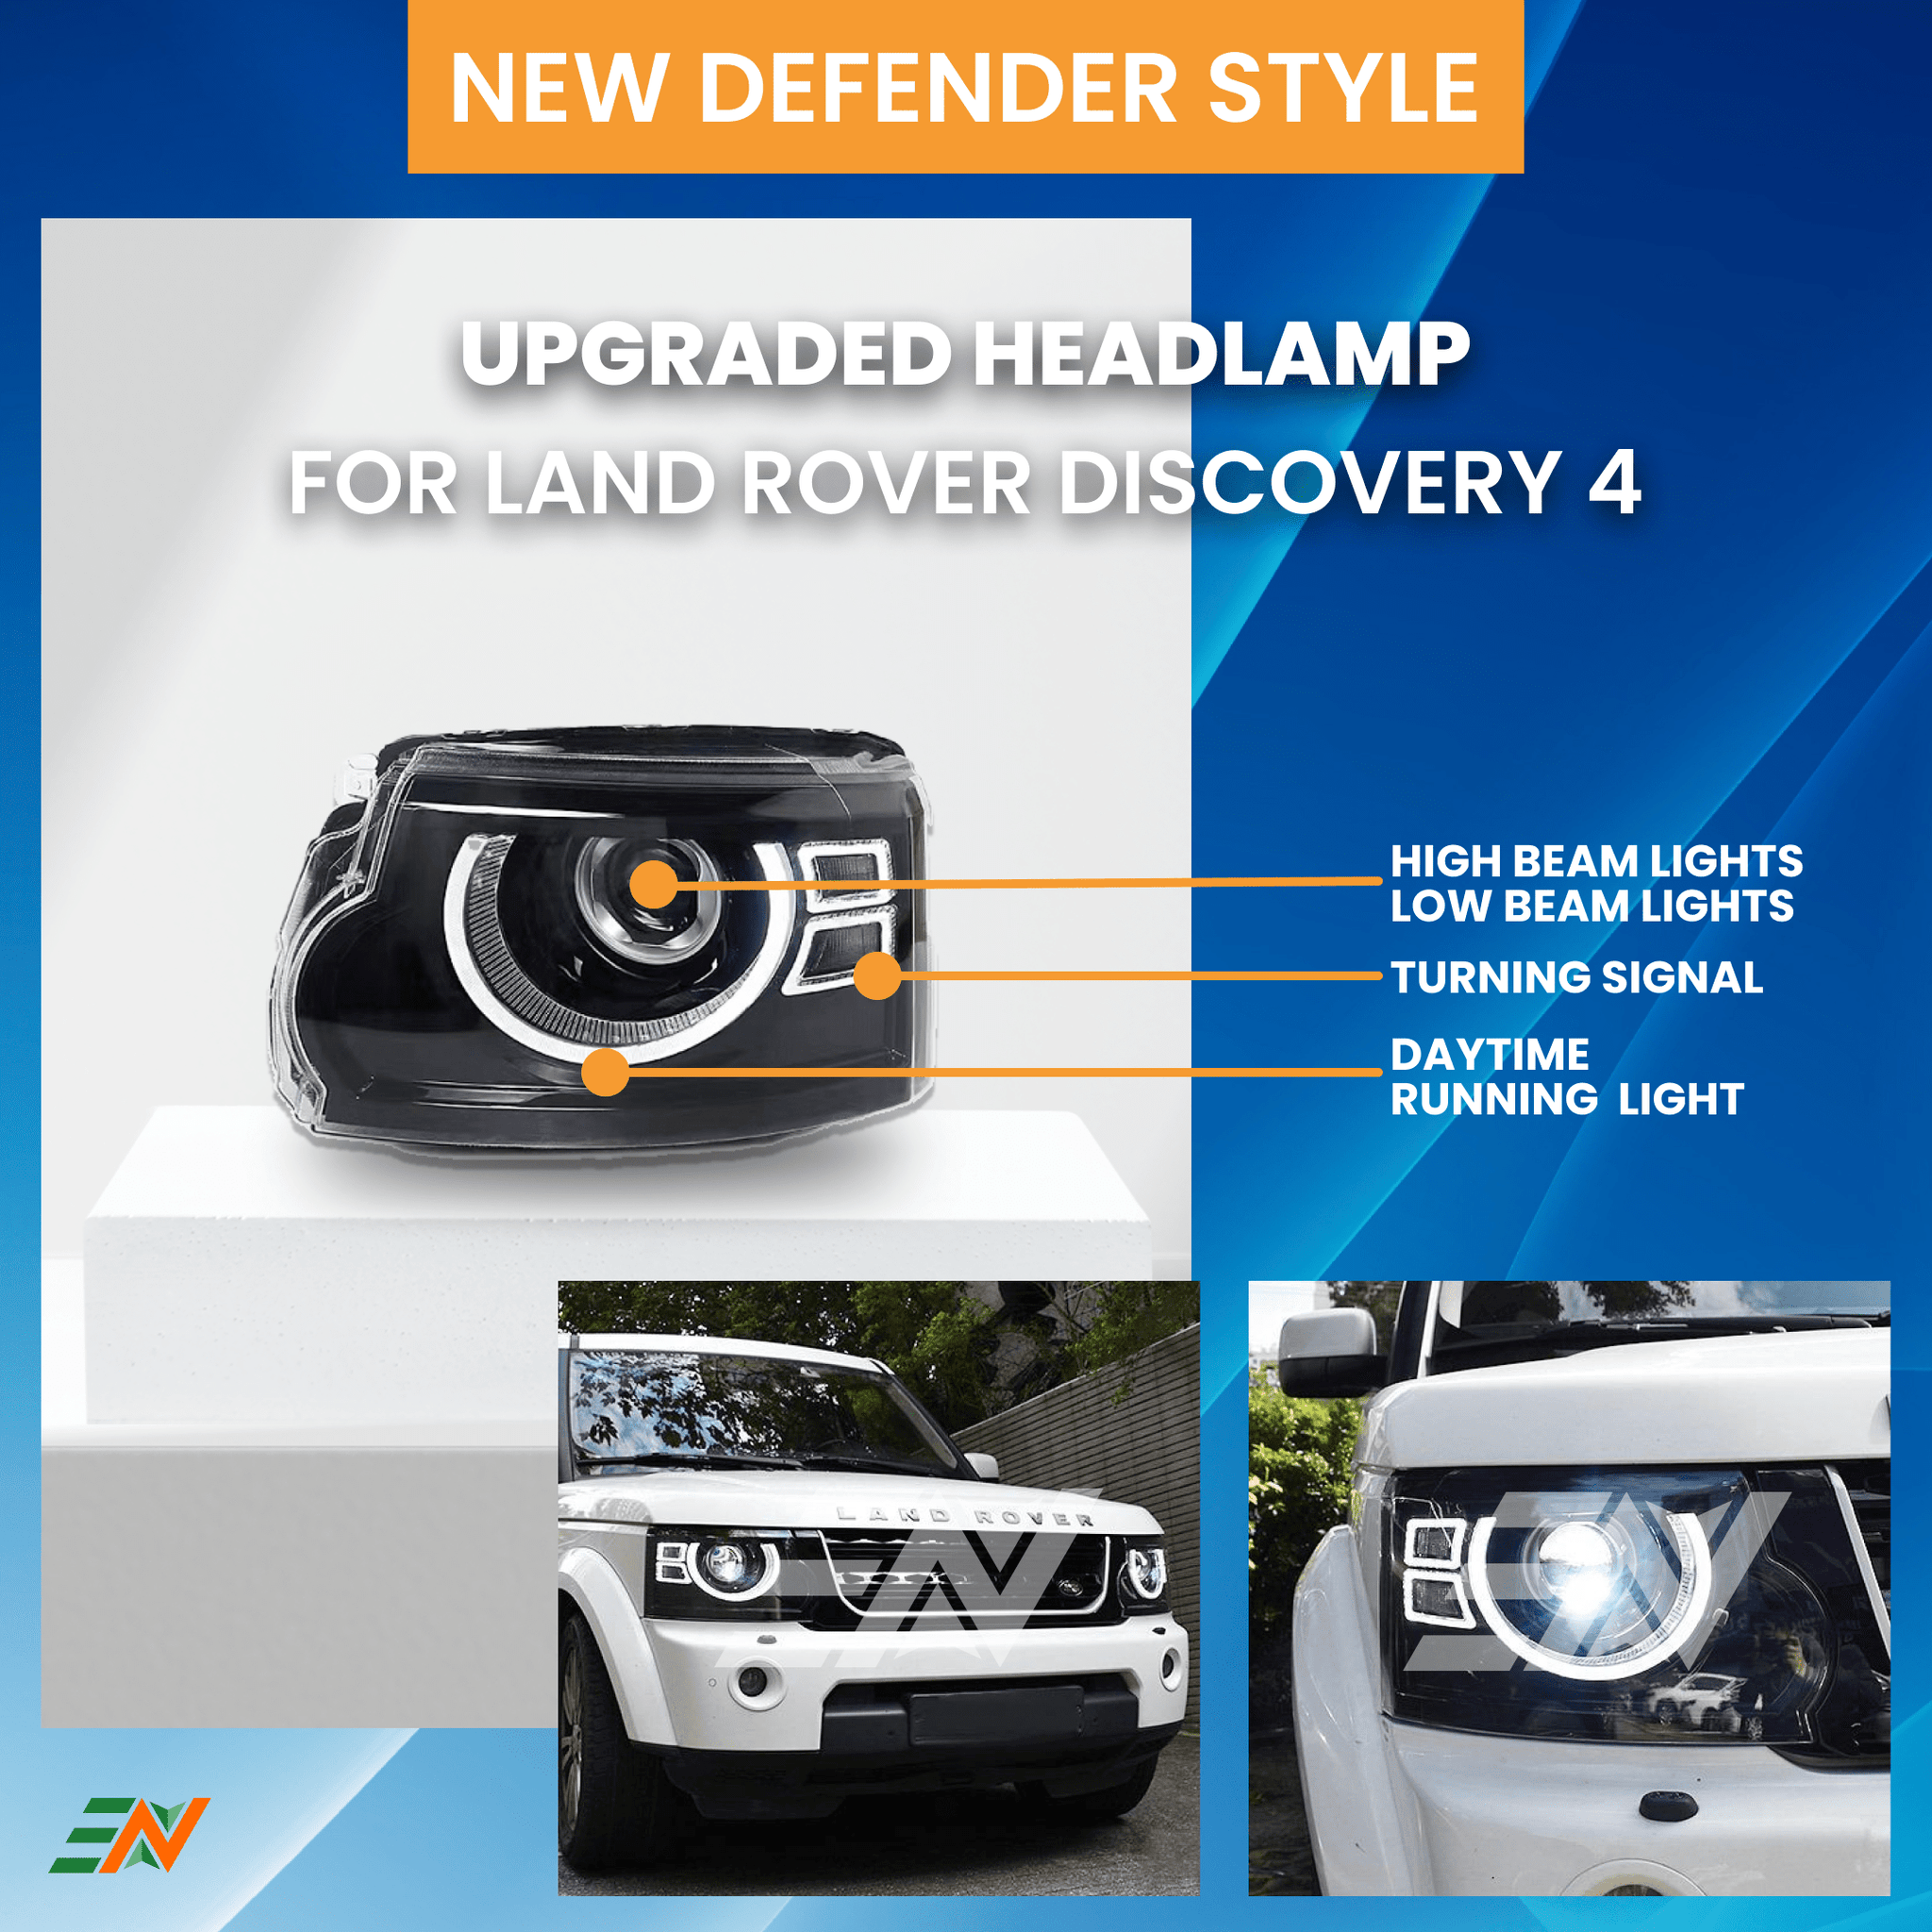 Euronavigate Upgraded headlamp for Land Rover Discovery 4 with new DEFENDER style